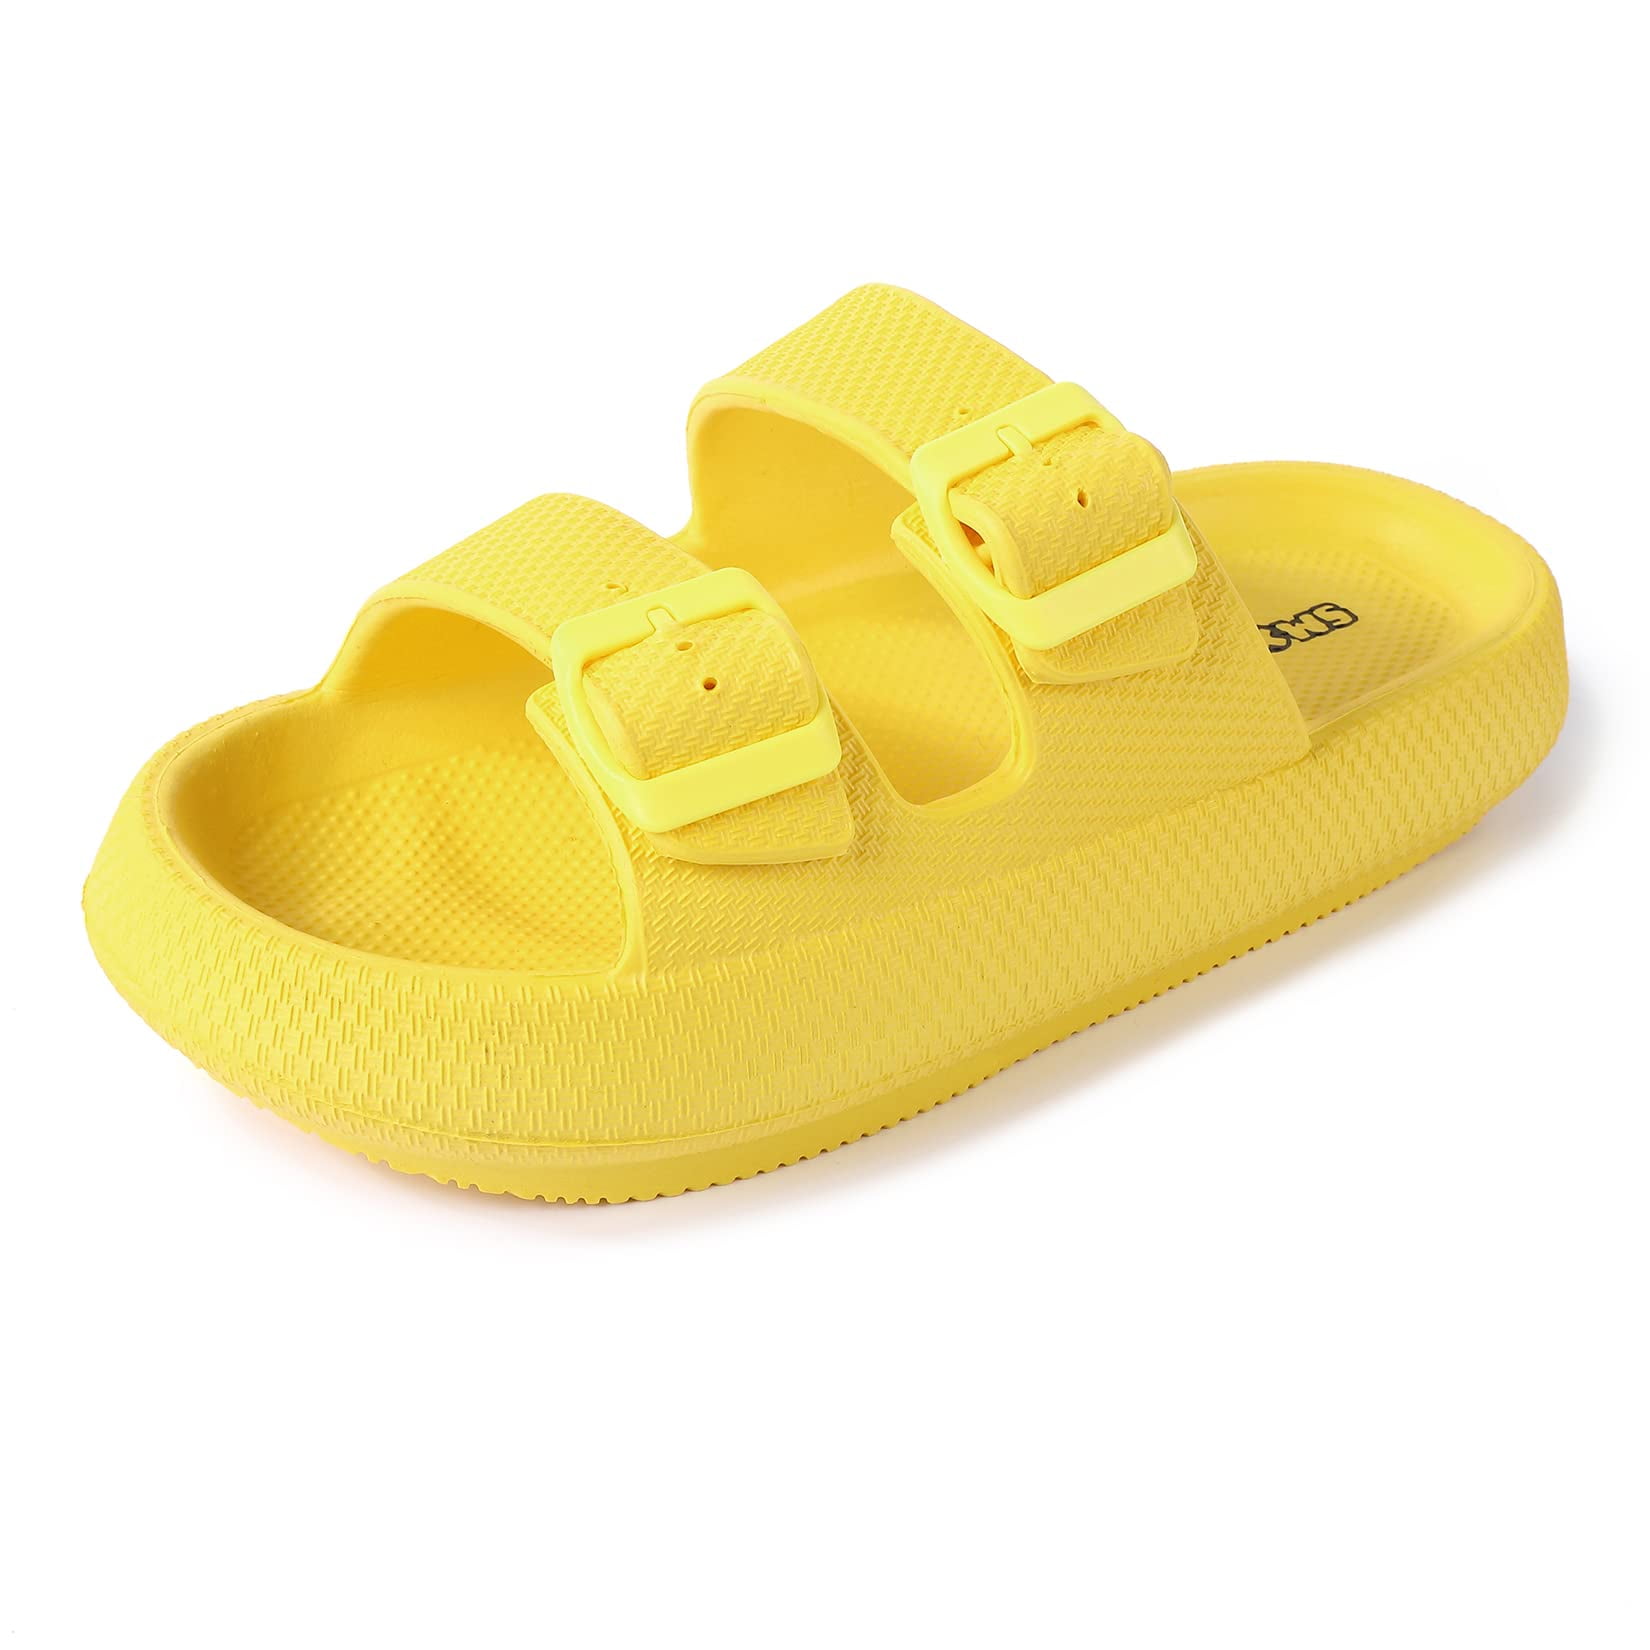 Oyang Women's Cloud Slides, Double Buckle Adjustable Summer Beach Pool  Pillow Slippers Thick Sole Cushion EVA Sandals 